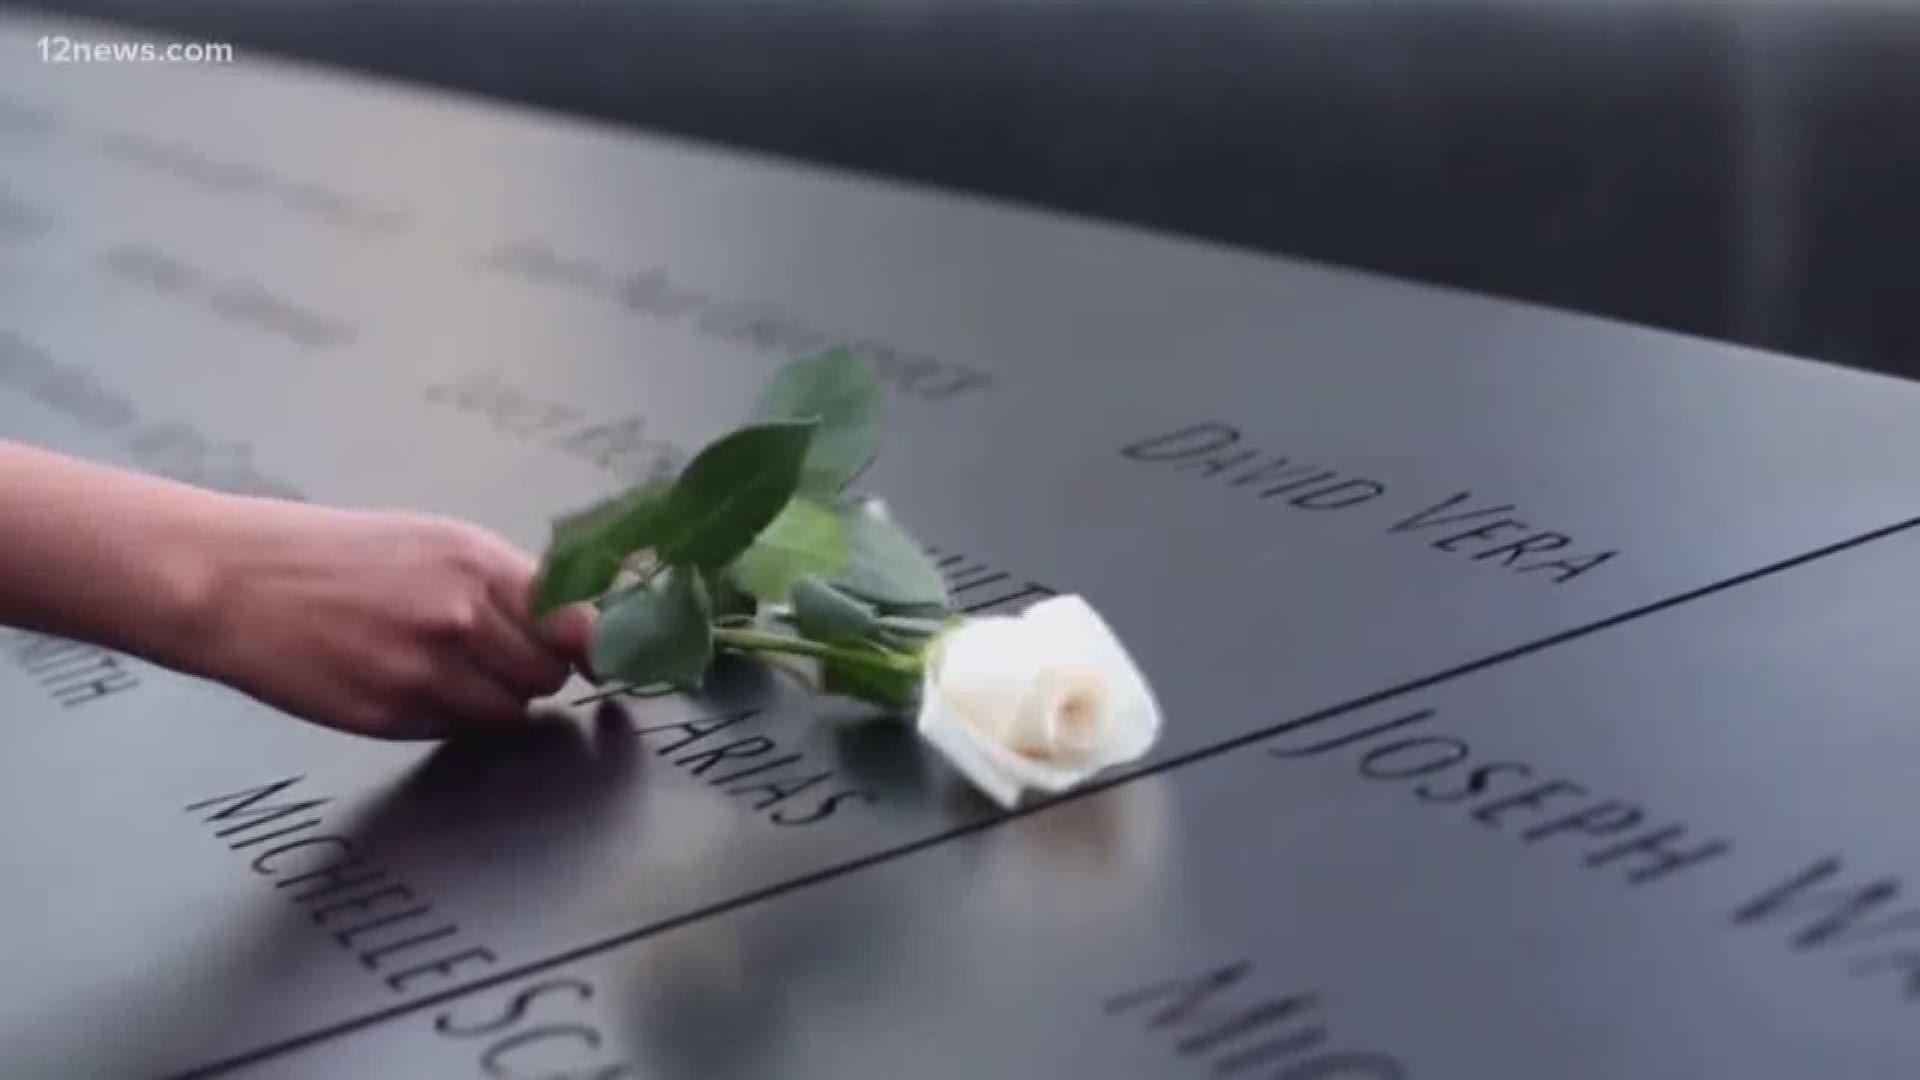 In this piece, we pay respects at a museum dedicated to the memory of those who lost their lives in the September 11th attacks and the first responders who risked everything to save them.